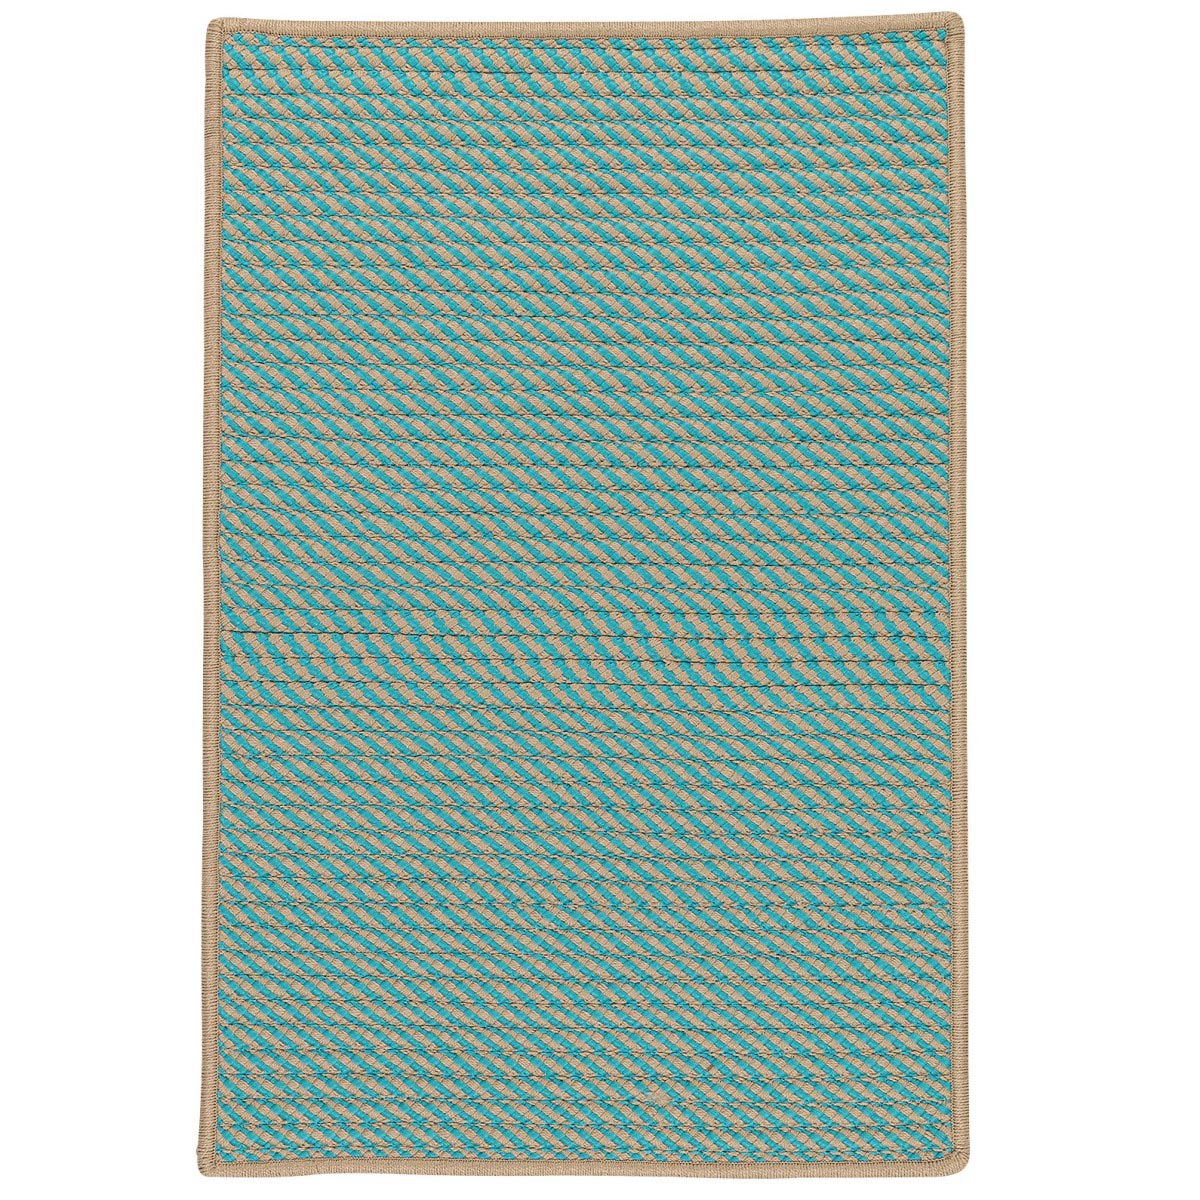 Point Prim Teal Outdoor Braided Rectangular Rugs